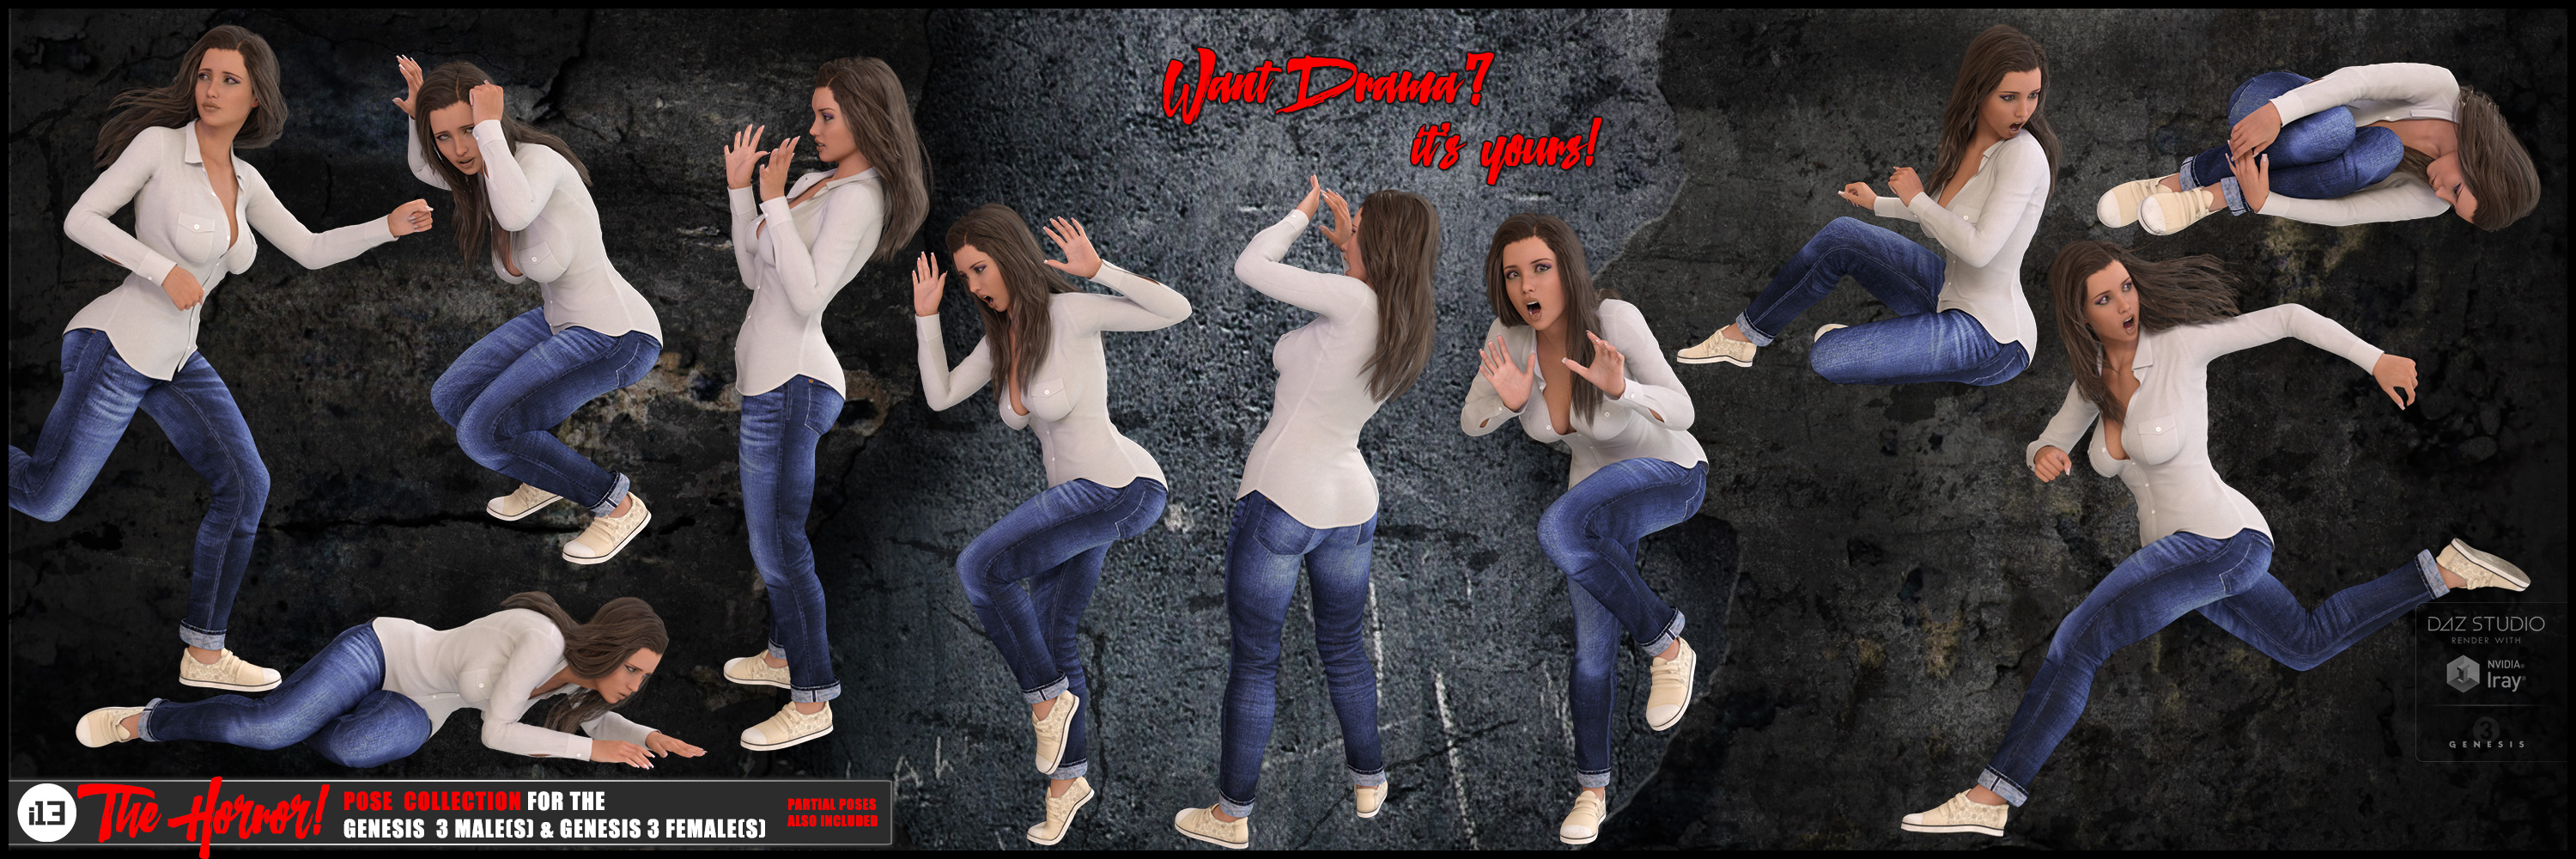 i13 The Horror! Pose Collection for the Genesis 3 Male(s) and Genesis 3 Female(s) by: ironman13, 3D Models by Daz 3D